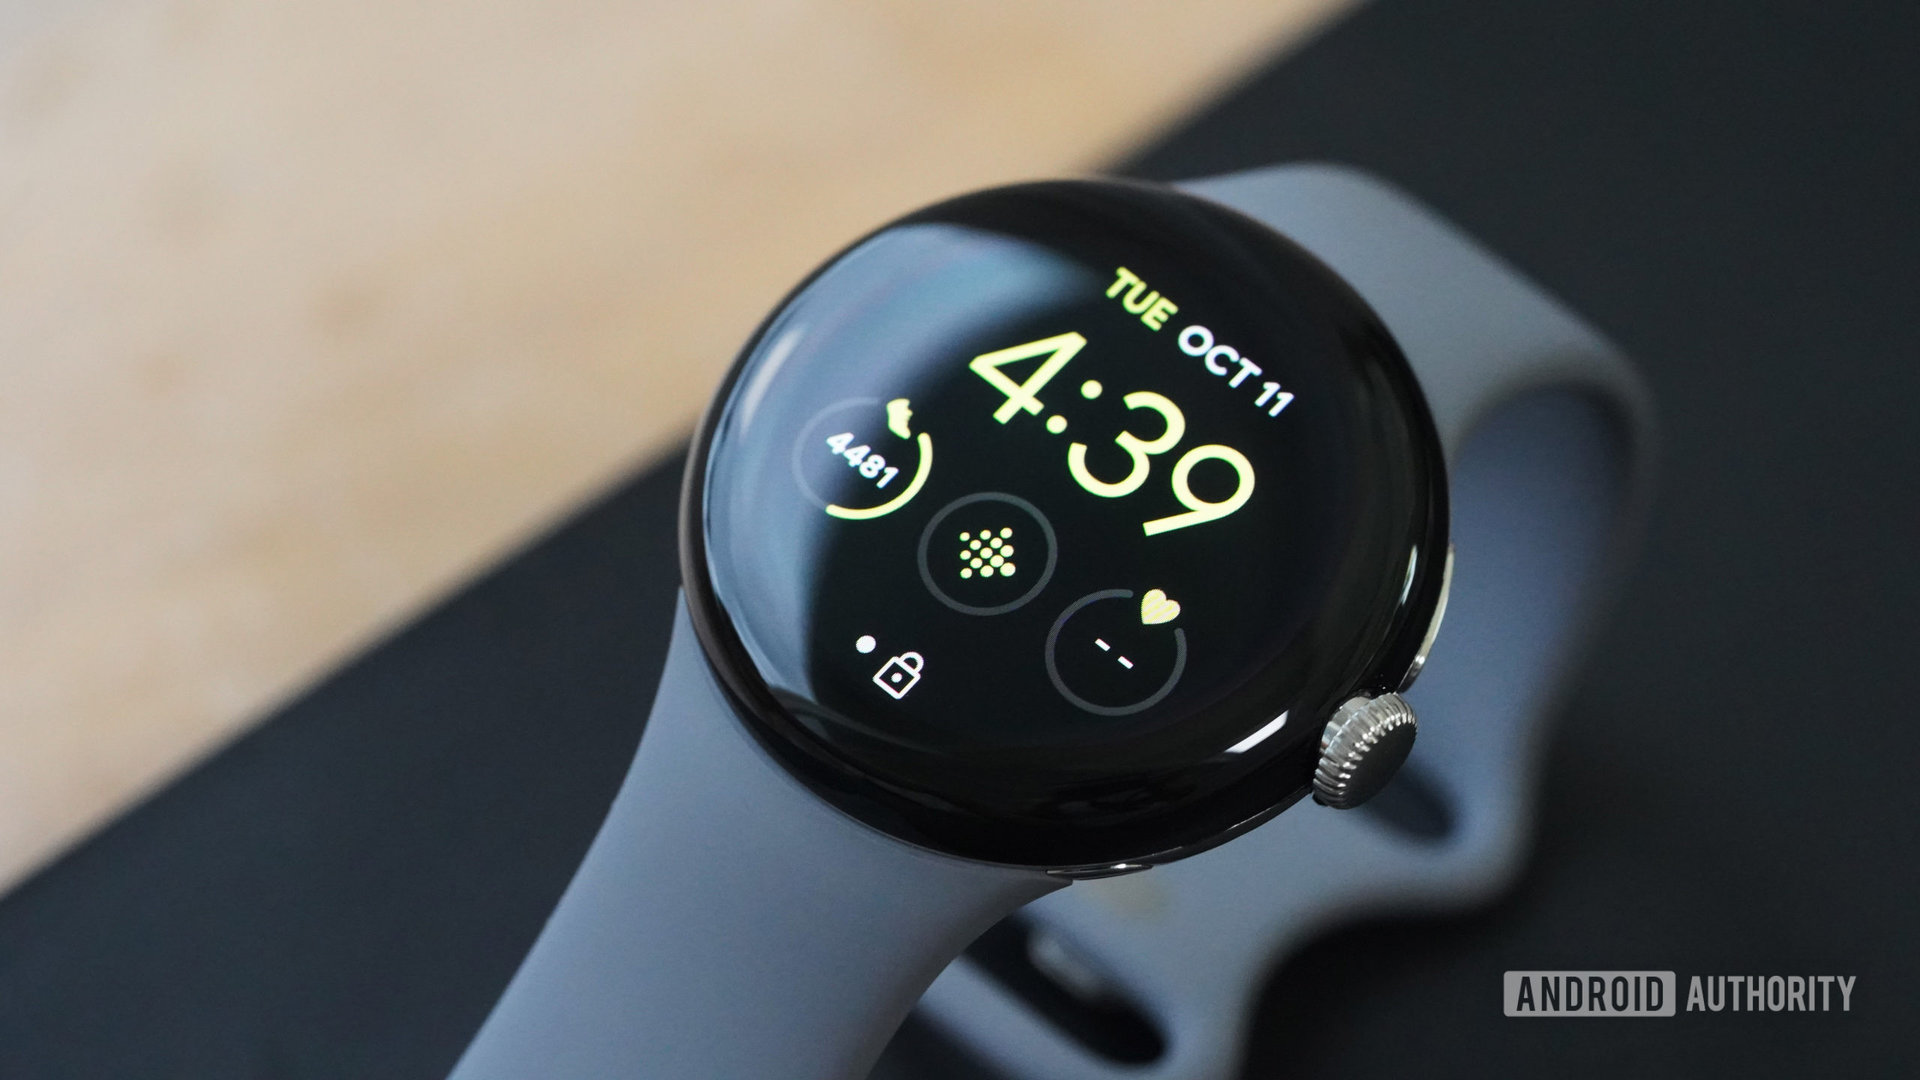 The Google Pixel Watch resting on a yoga mat displays the user's activity statistics on the default watch face.